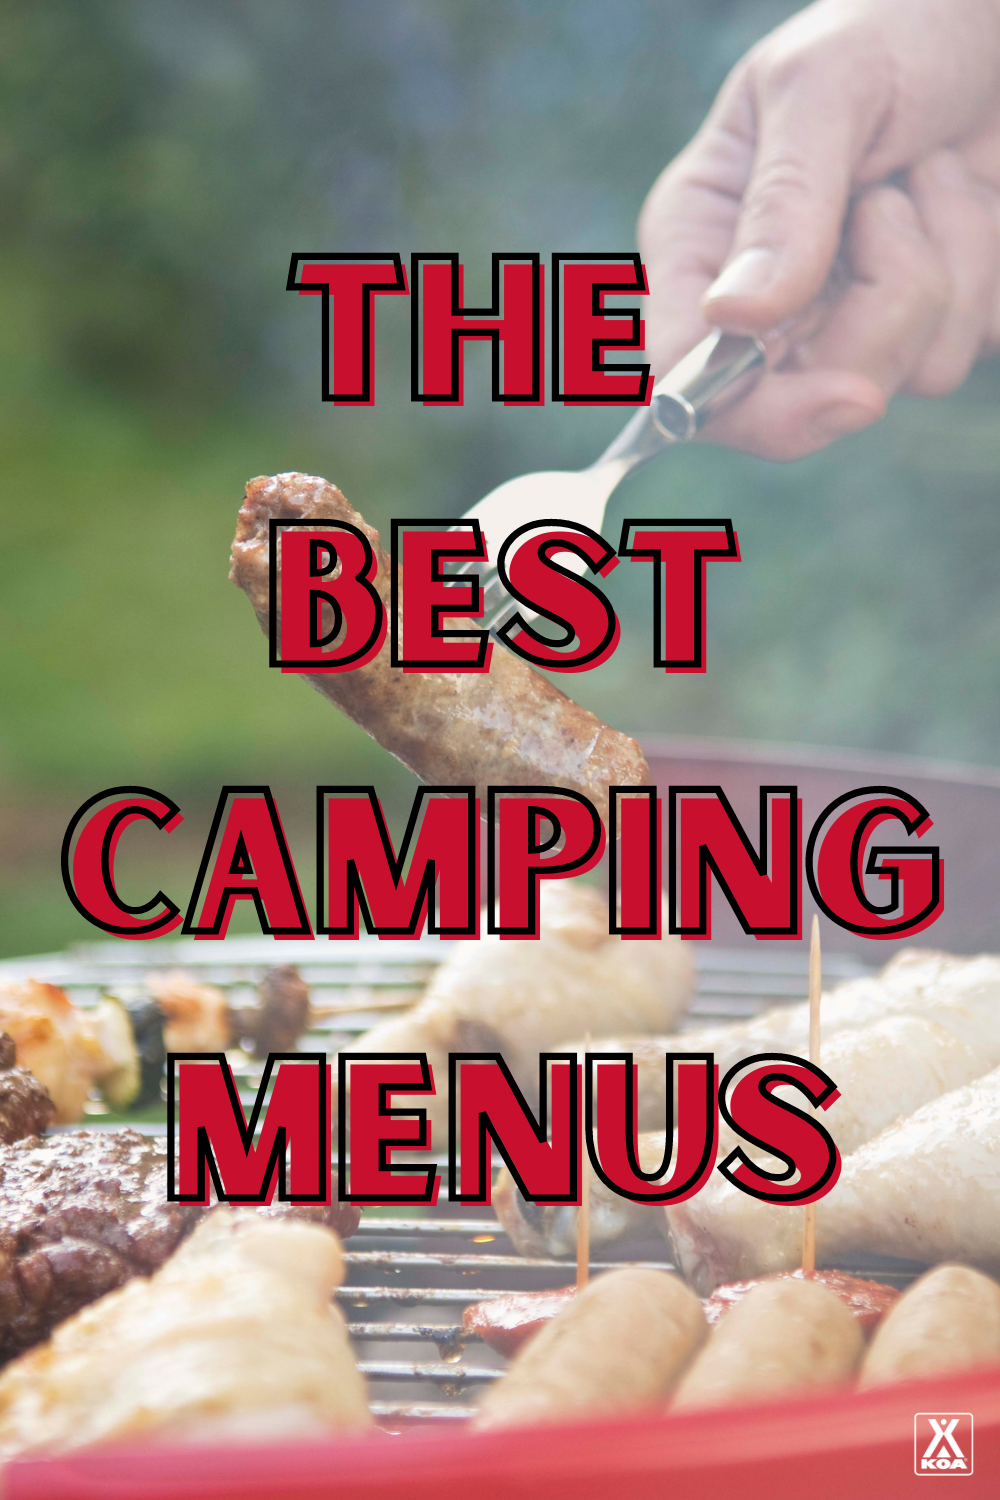 Find the perfect camping menu for your next family adventure. From kid-friendly options to farm-to-table menu ideas, there's something for everyone!